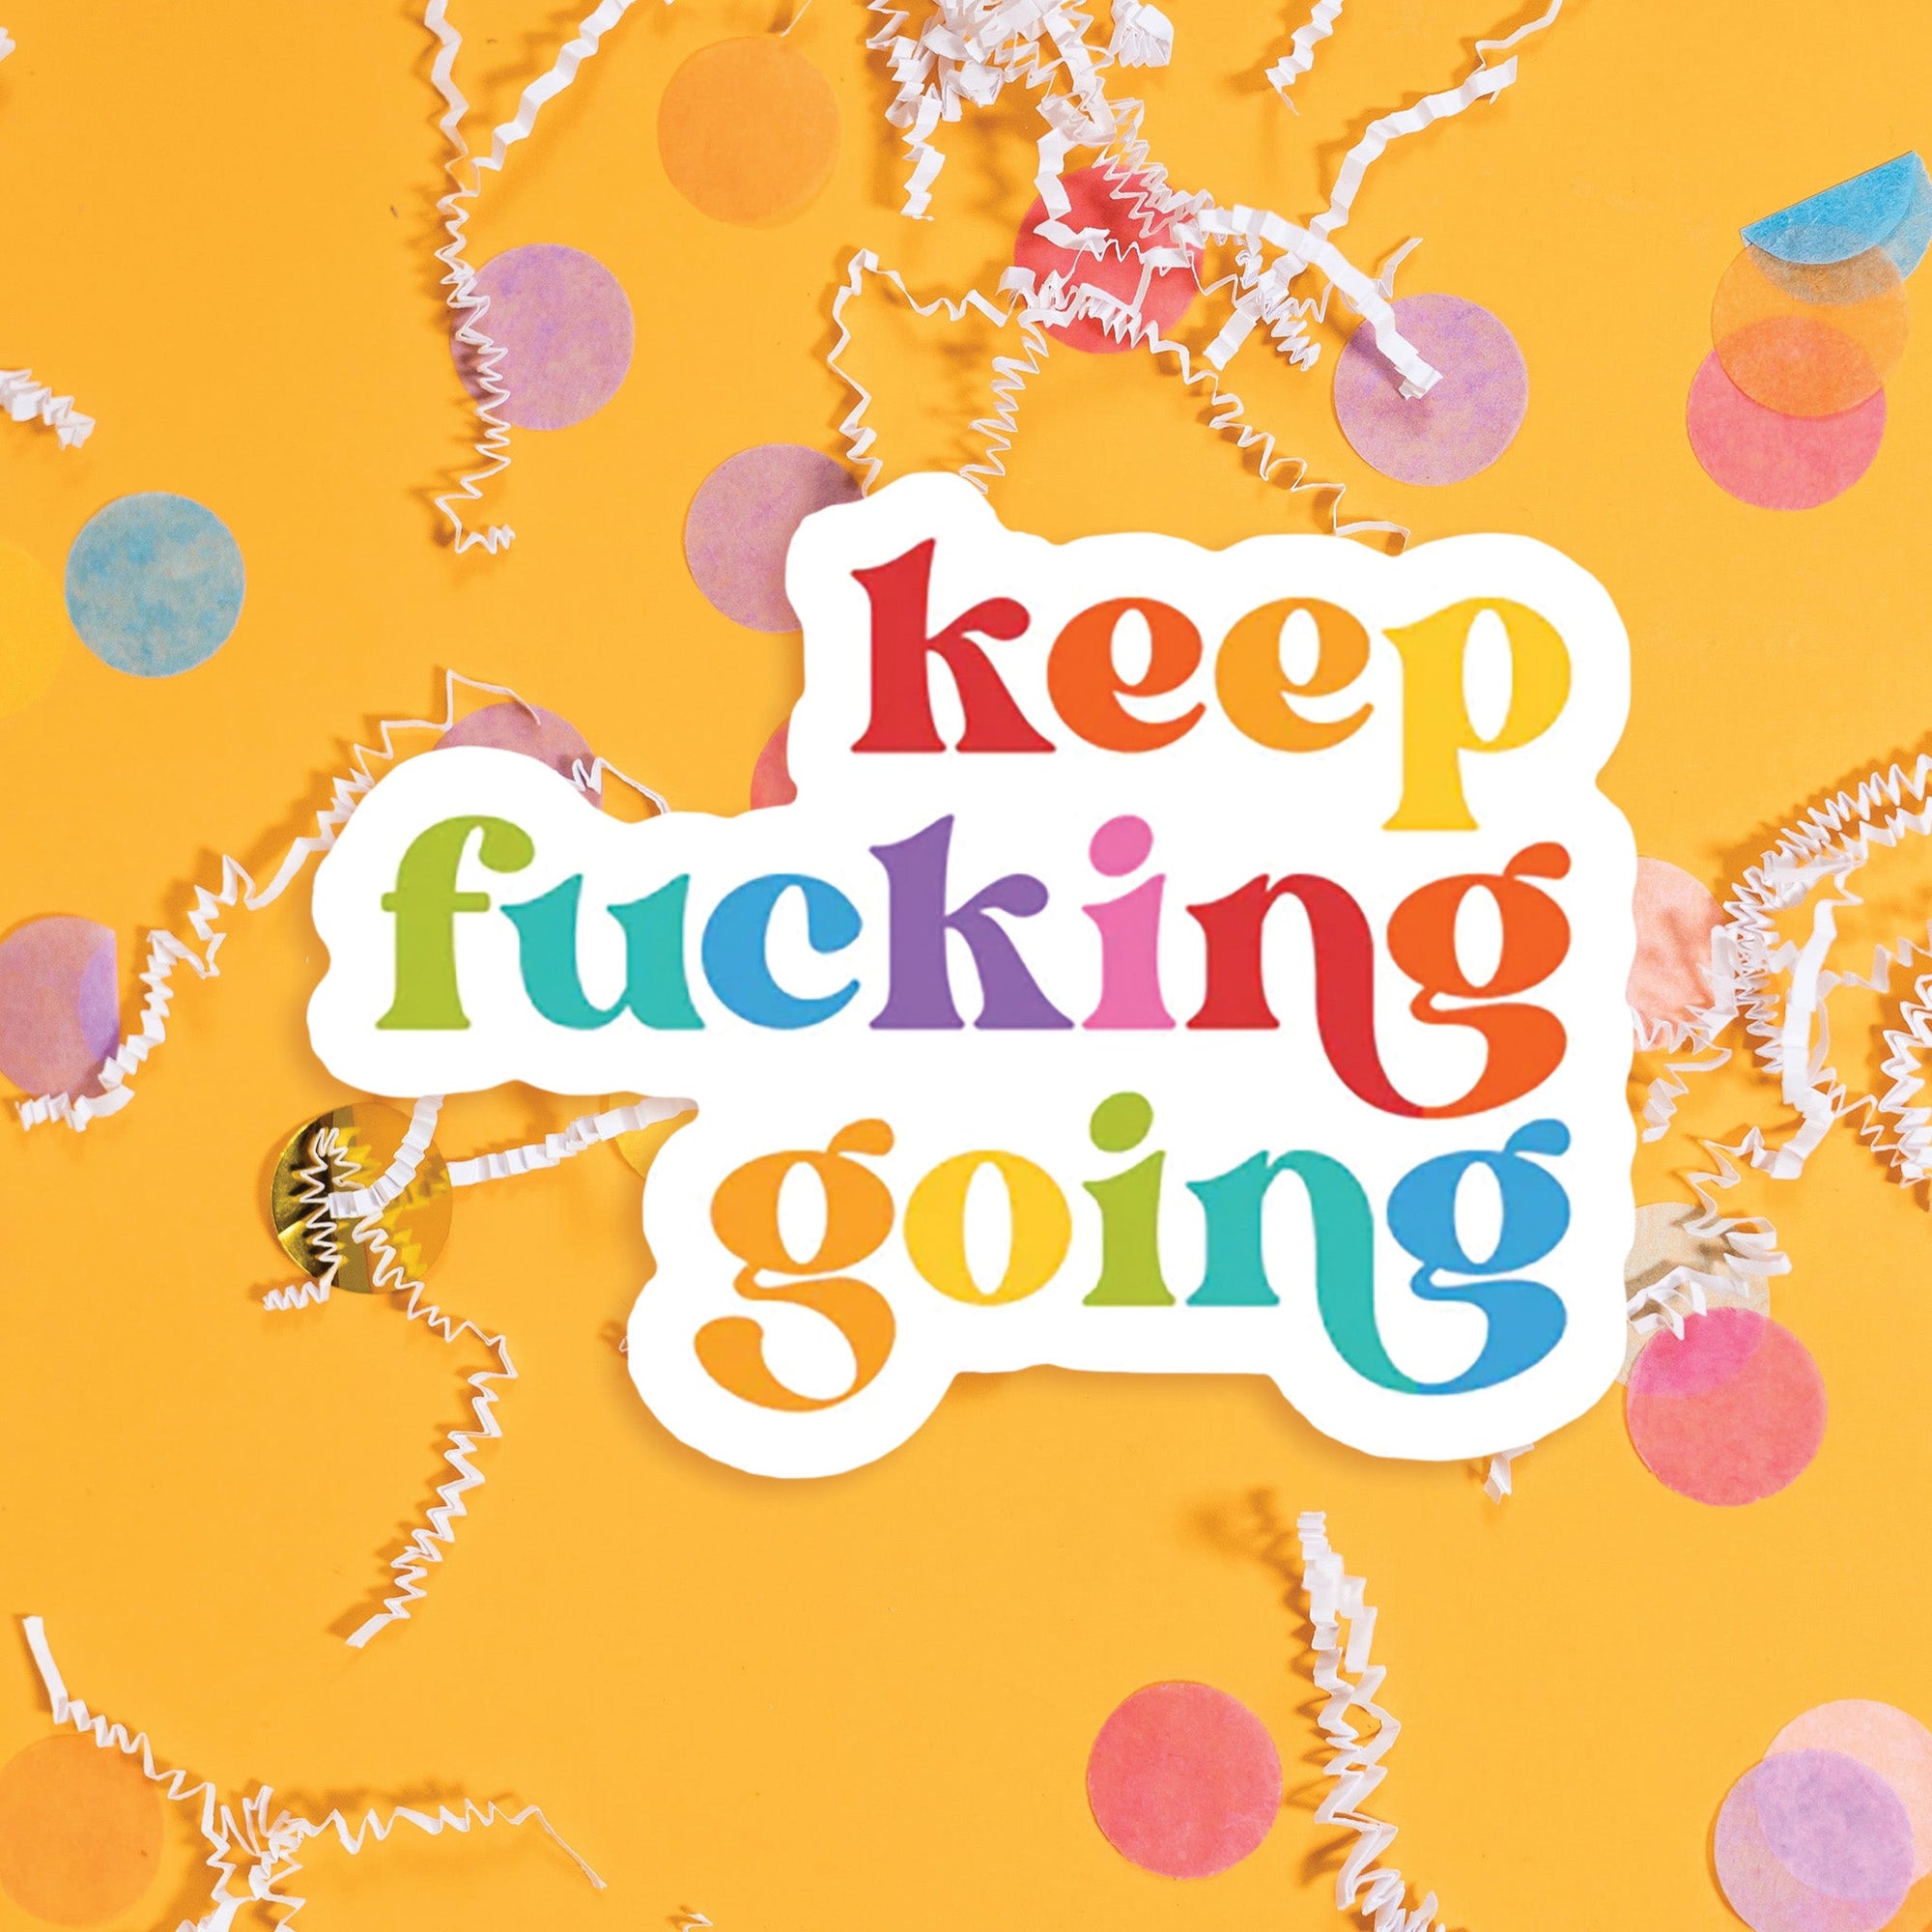 On a sunny mustard background sits a sticker with colorful confetti and white crinkle scattered around. This sticker has colorful lettering in red, dark coral, orange, sunny mustard, celery green, turquoise, blue, purple, and bubblegum pink. It says "keep fucking going" in thick serif font. Approximately 3".